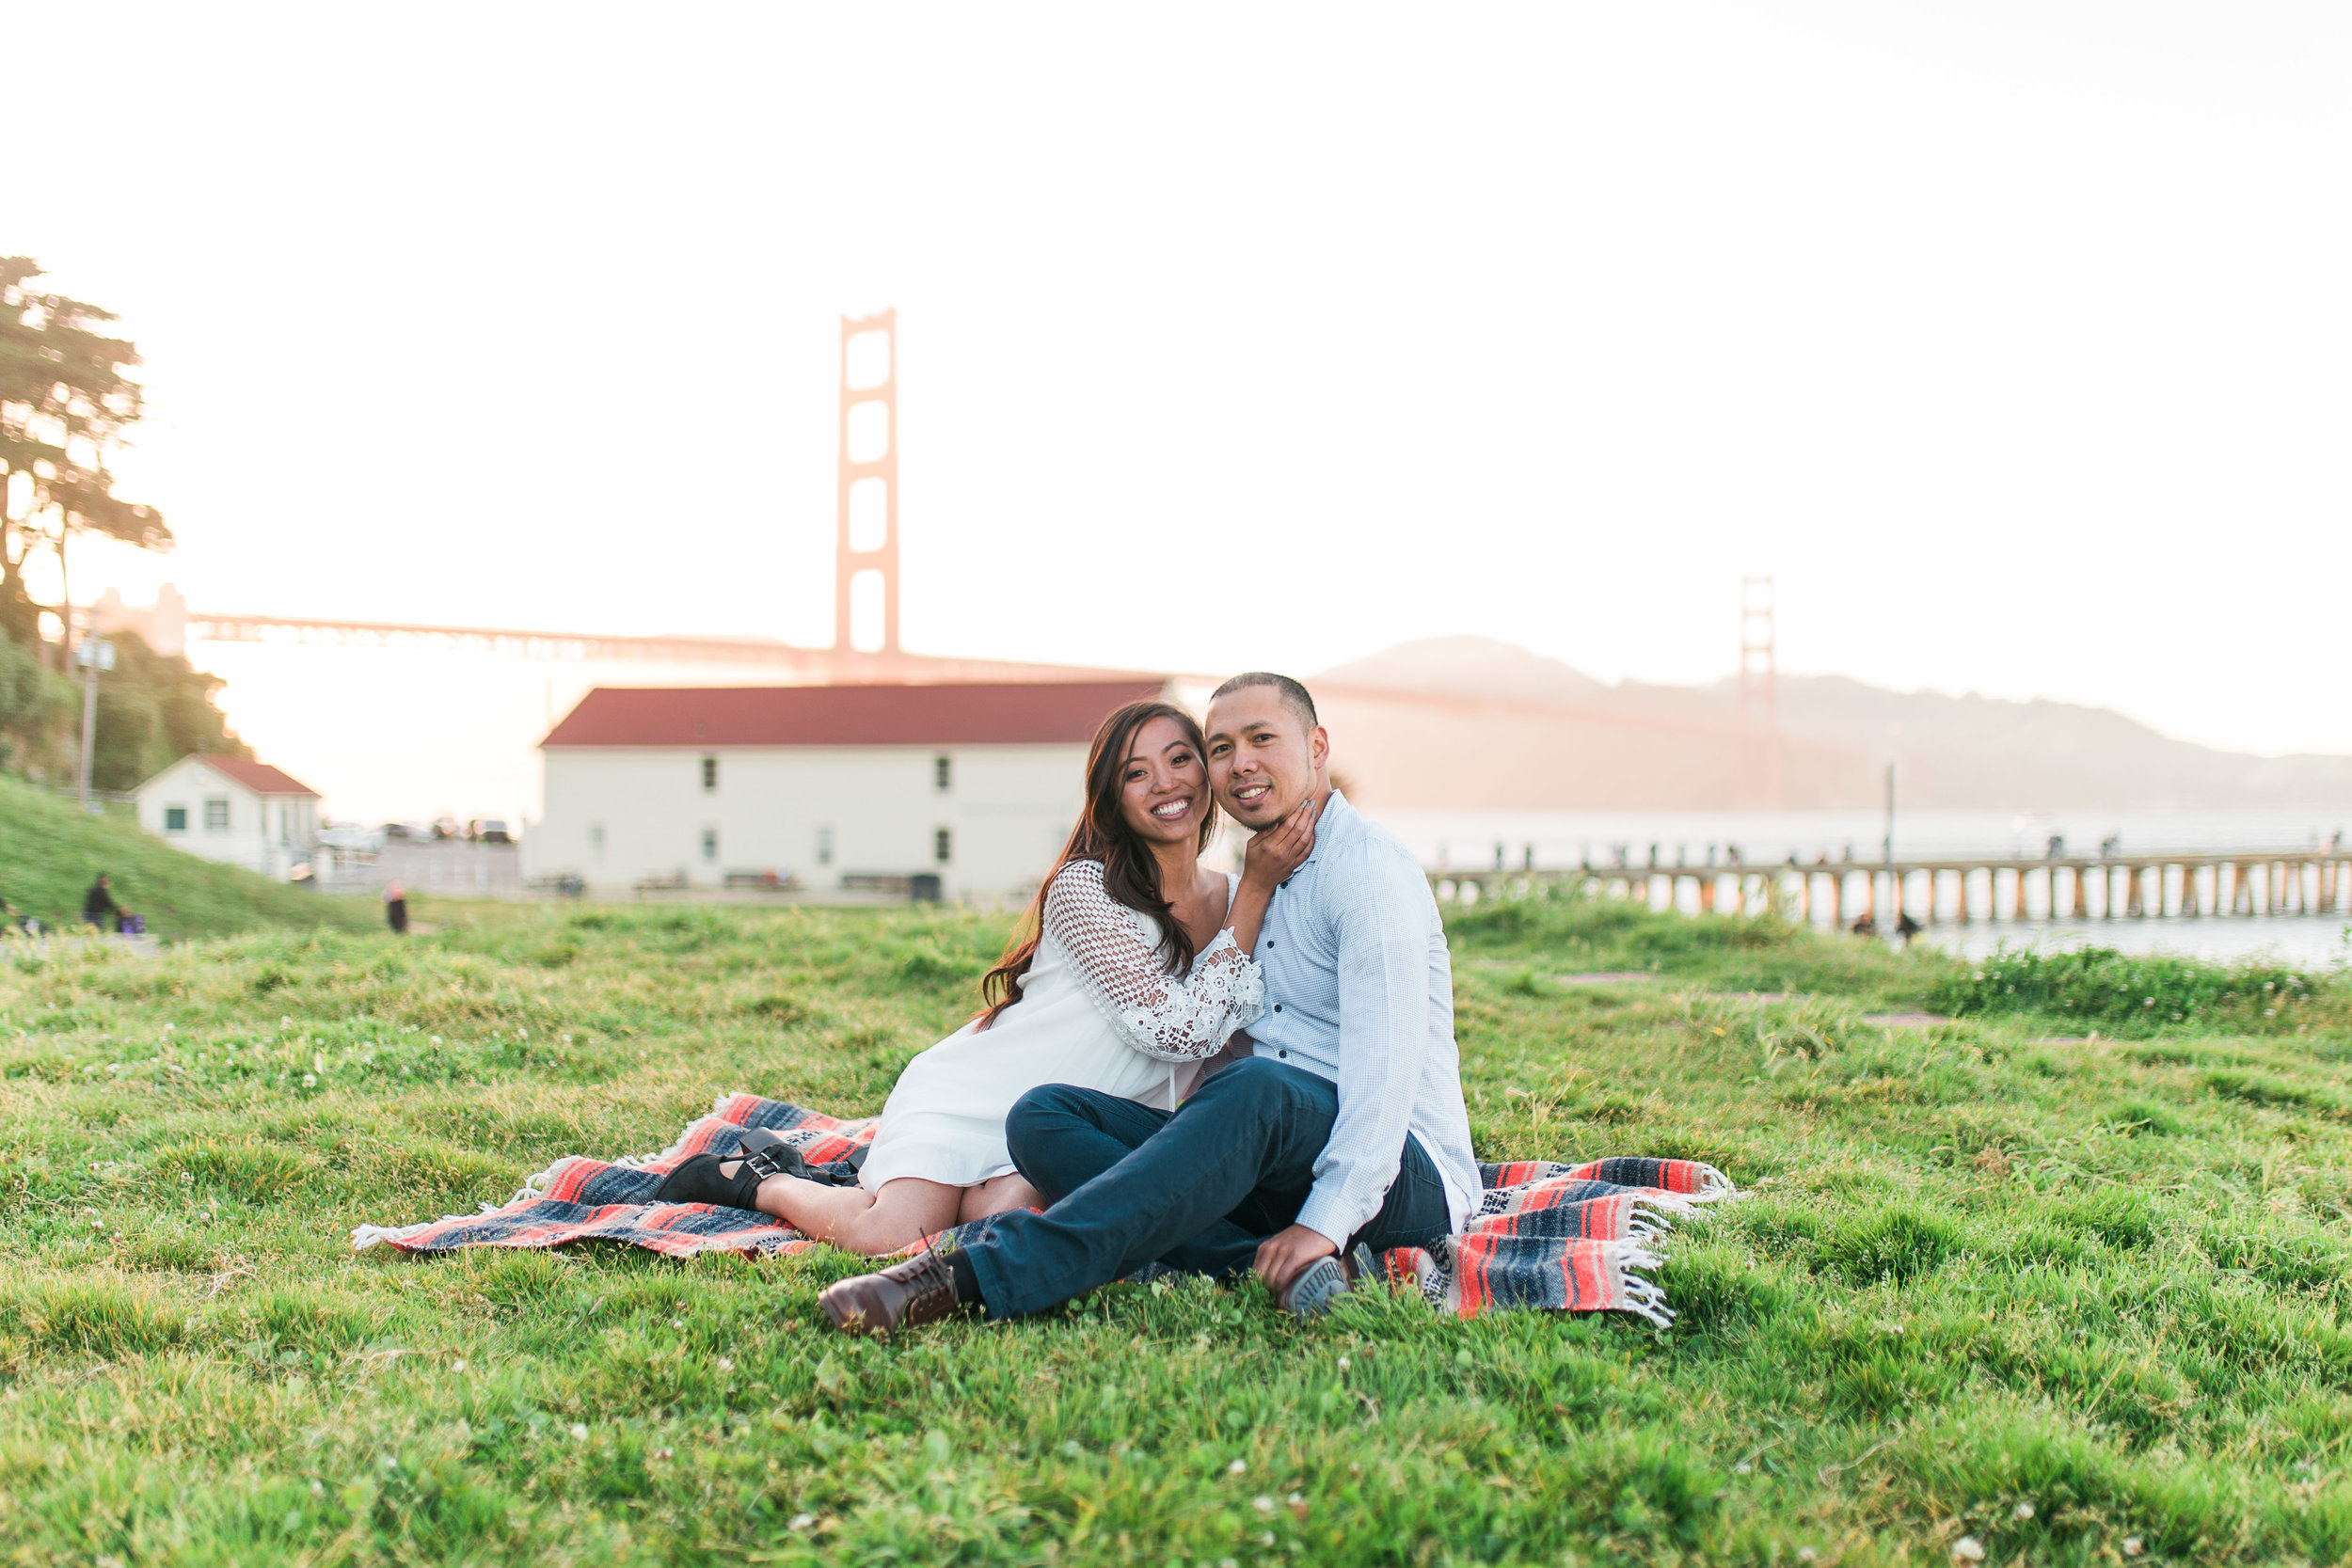 Best Engagement Photo Locations in SF - Crissy Field Engagement Photos by JBJ Pictures (2).jpg